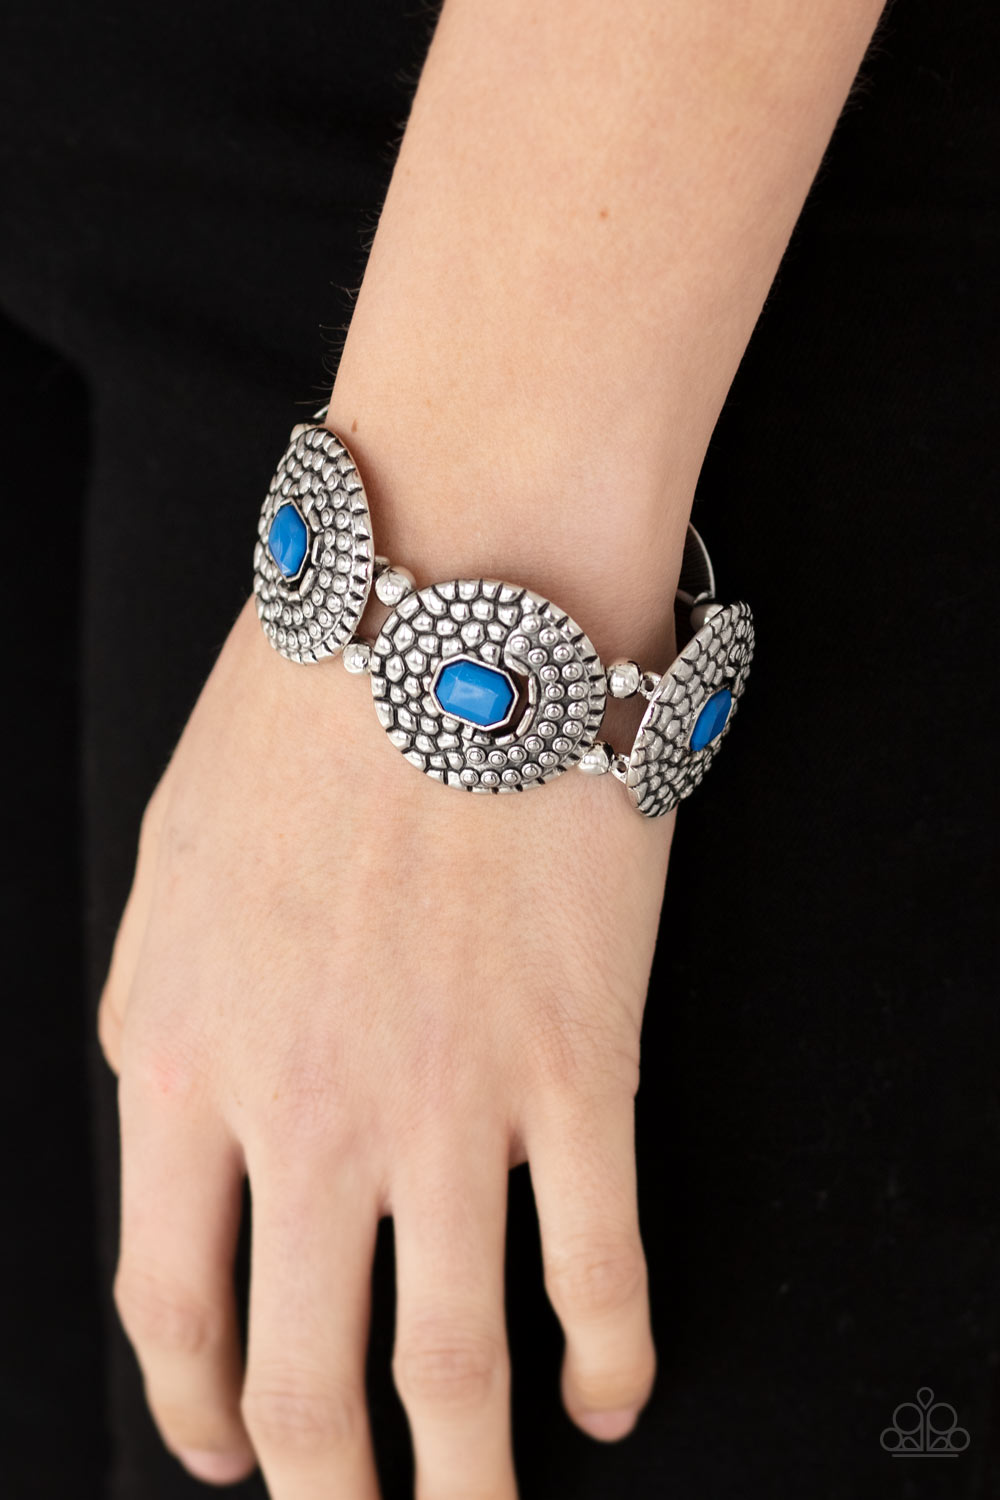 Prismatic Prowl - Blue and Silver Bracelet - Paparazzi Accessories - French Blue emerald shaped beads adorn the centers of round silver discs studded and embossed in metallic croc-like textures. Infused with pairs of silver beads, the decorative frames are threaded along stretchy bands around the wrist for a wild pop of color.